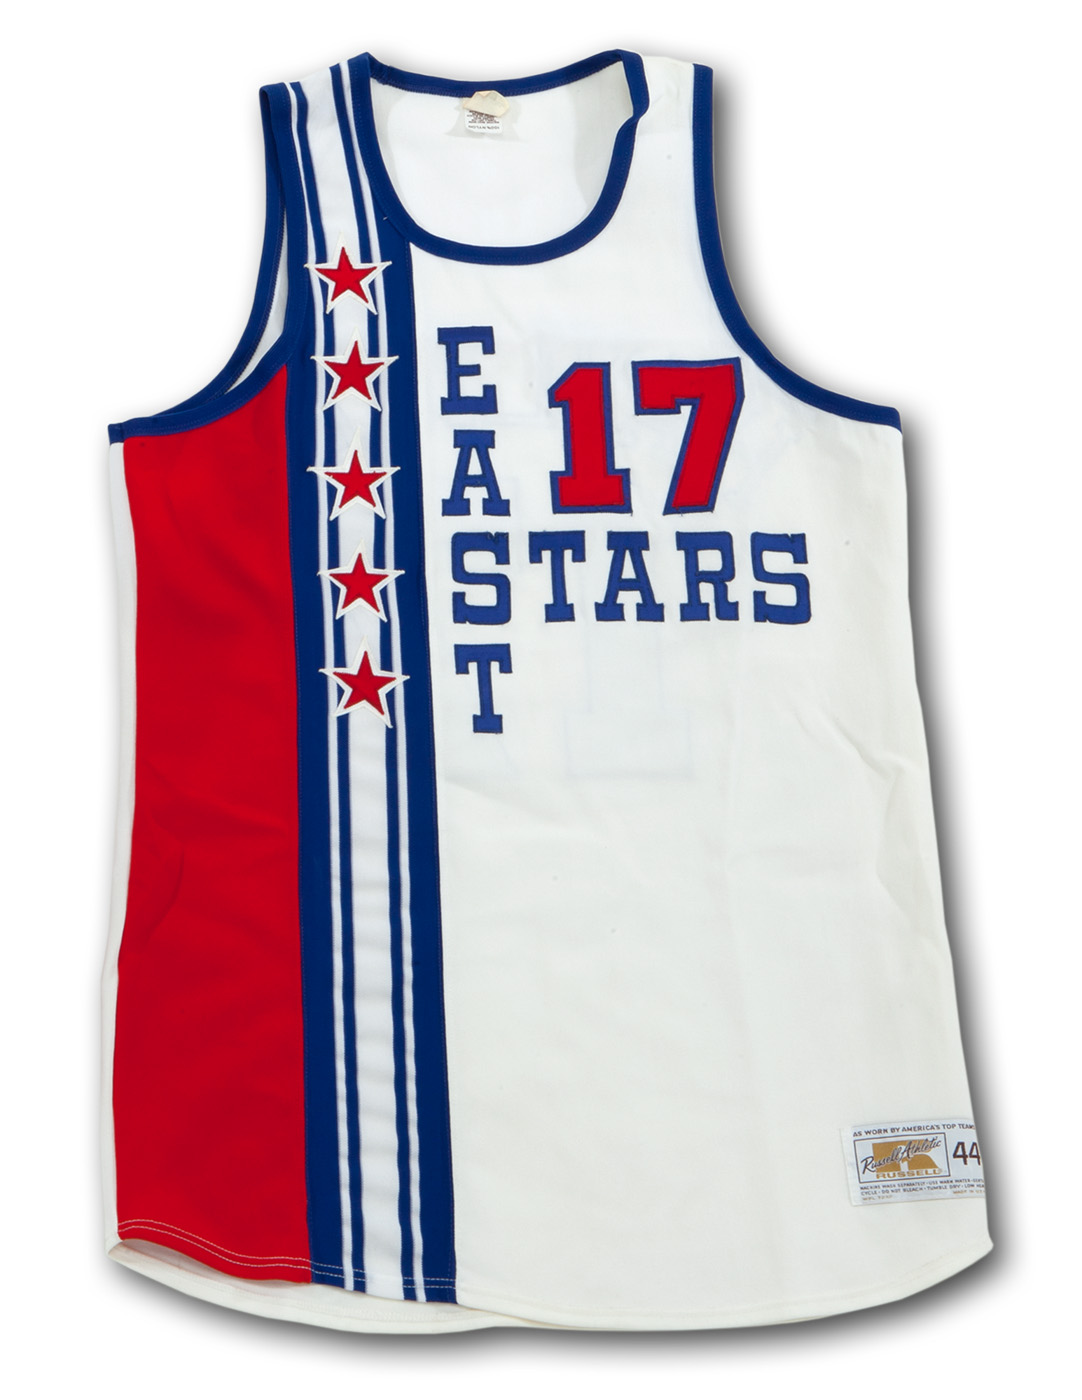 John Havlicek 1966 First All-Star Game Used Signed Uniform Jersey MEARS A10  COA